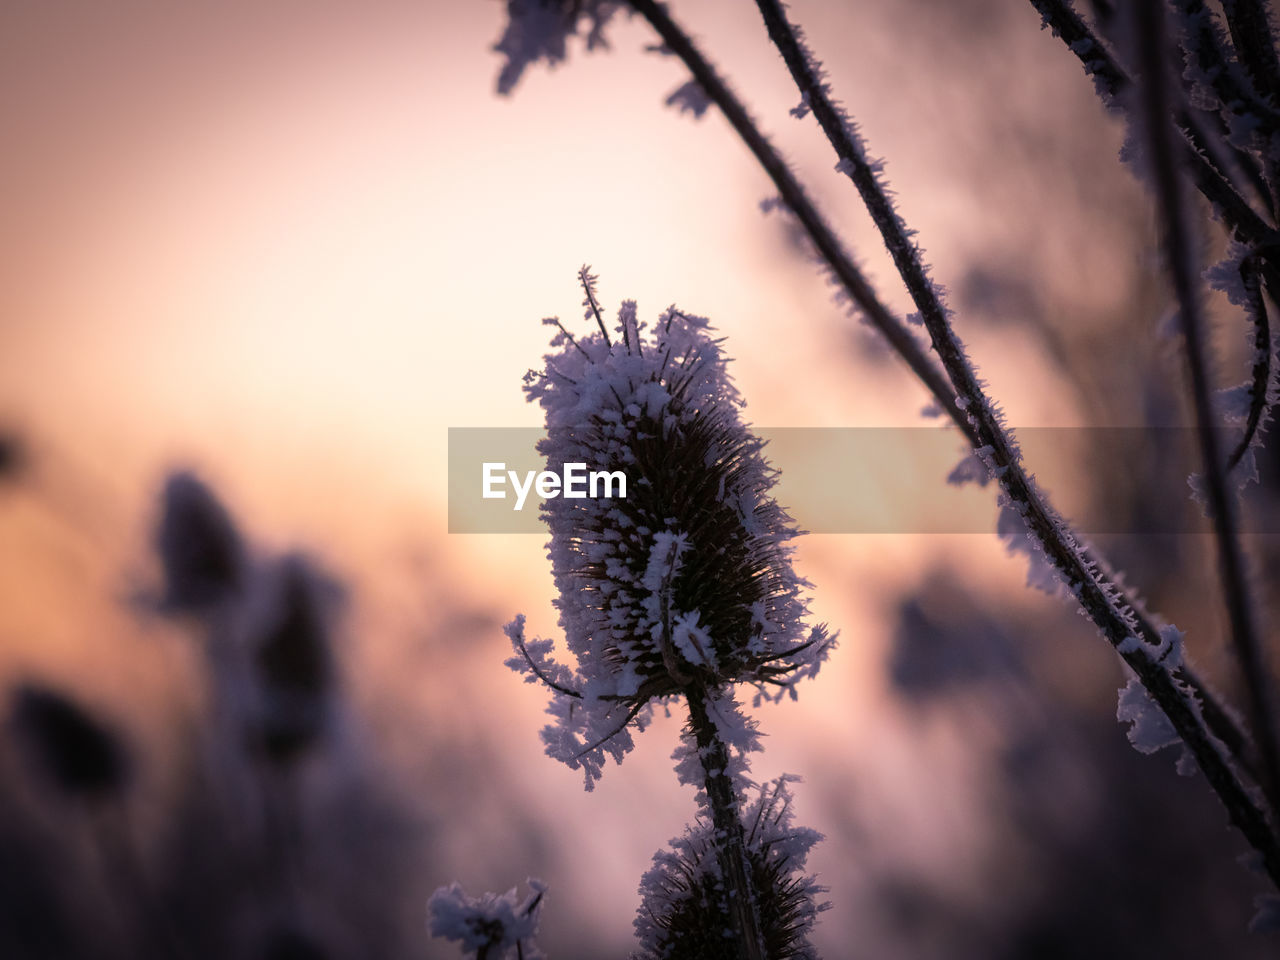 plant, nature, beauty in nature, tree, sky, sunset, no people, sunlight, flower, leaf, coniferous tree, growth, focus on foreground, tranquility, branch, pinaceae, pine tree, flowering plant, macro photography, winter, environment, silhouette, outdoors, freshness, land, close-up, frost, scenics - nature, twilight, forest, landscape, cold temperature, reflection, back lit, sun, grass, tranquil scene, dusk, non-urban scene, light